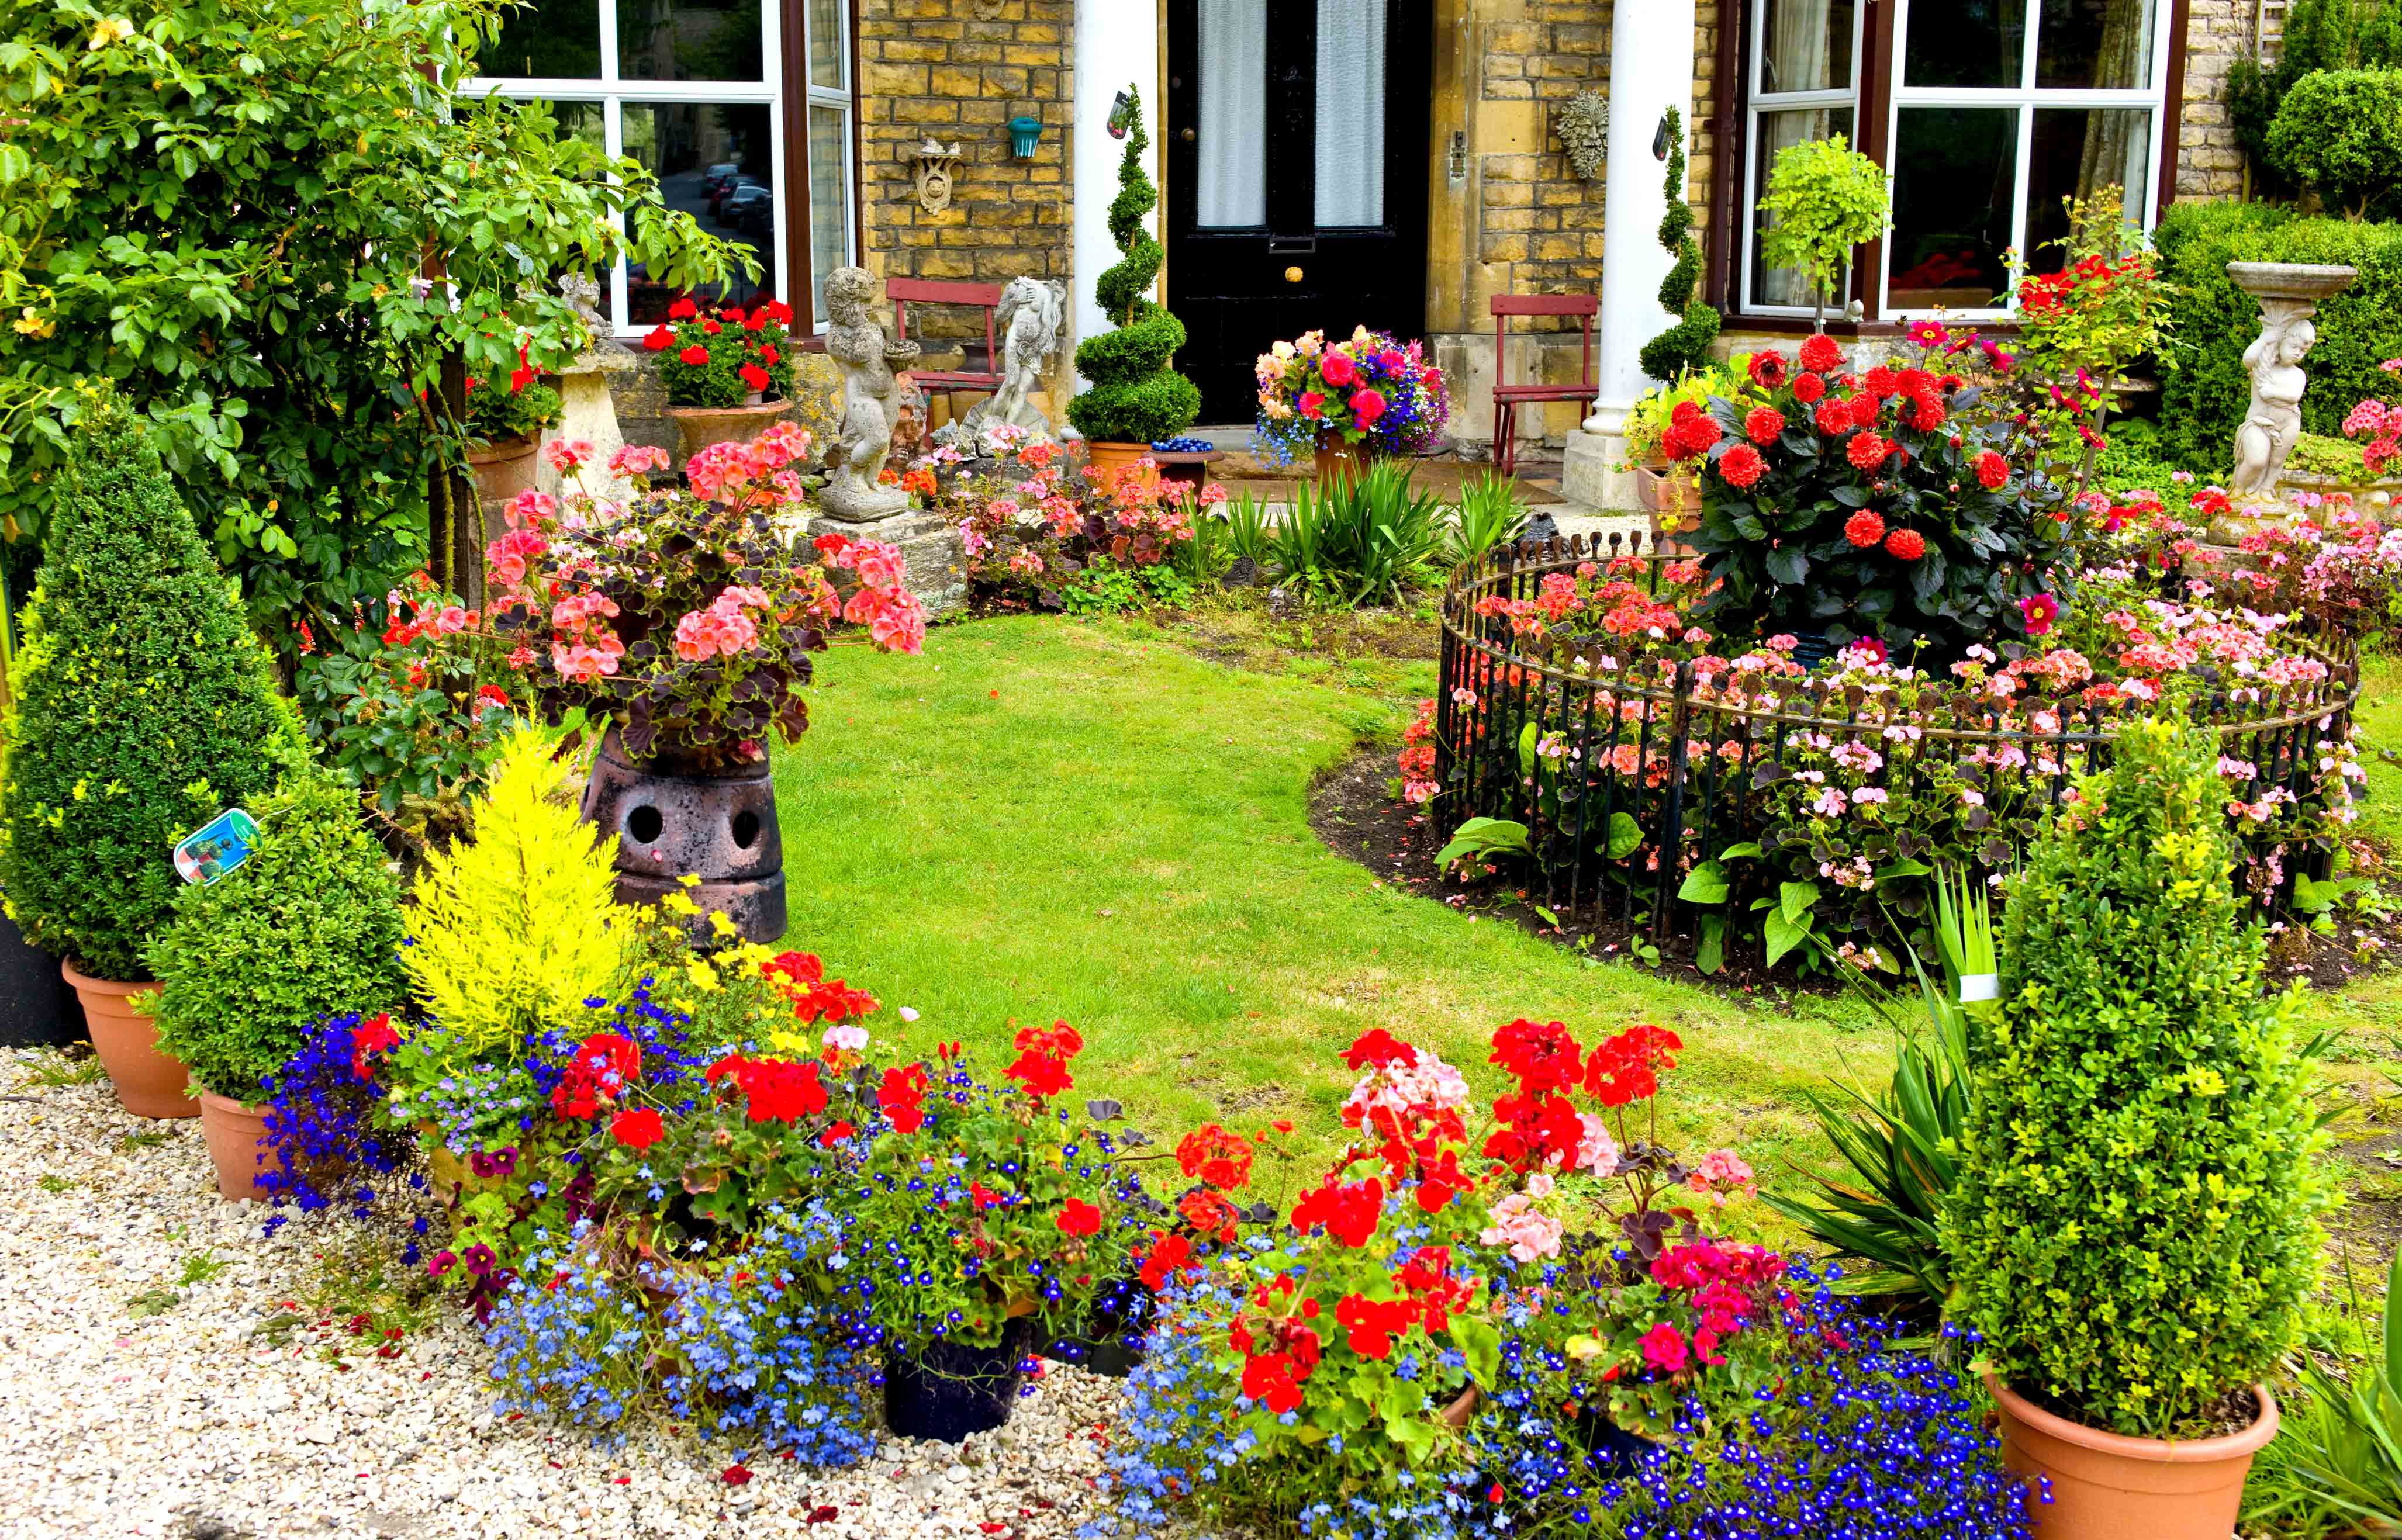 English Country Garden | Images from Around the World - Pixel By Pixel